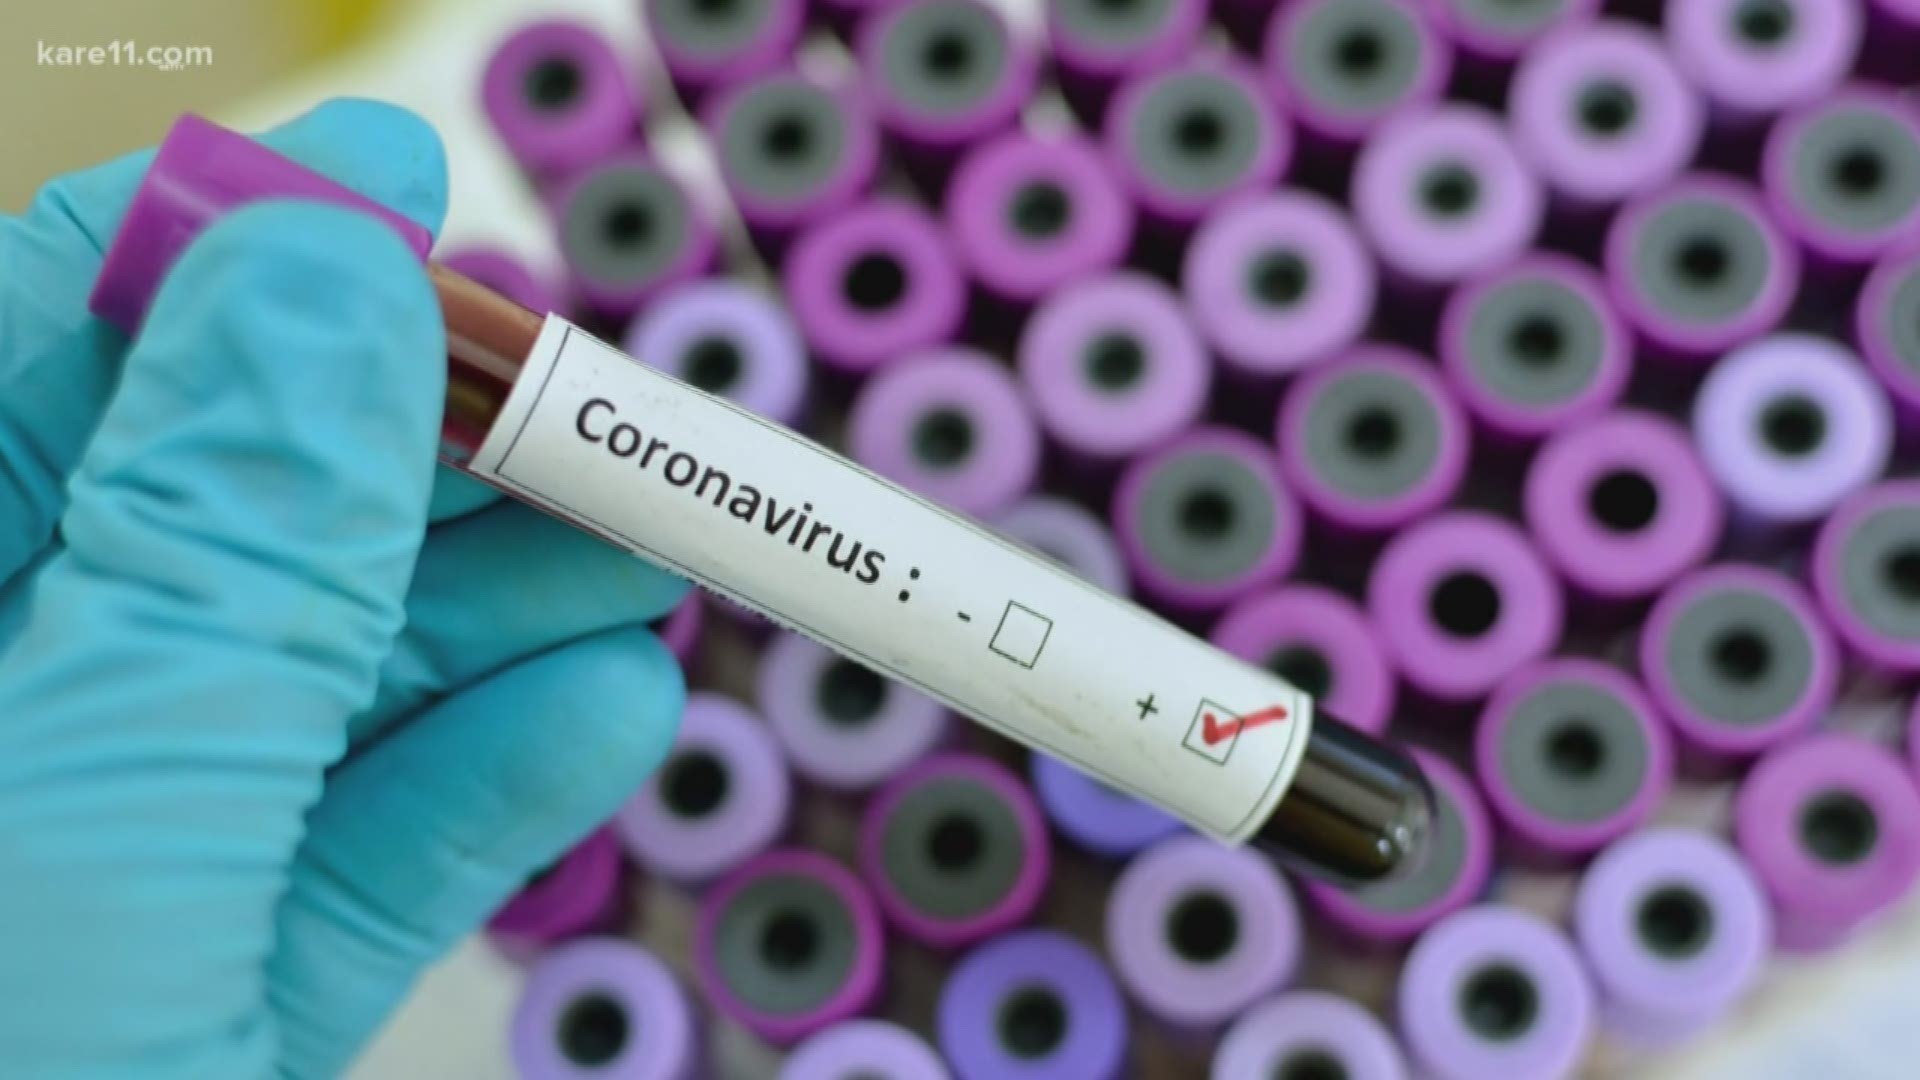 With the first confirmed case of Coronavirus in the U.S. should we be worried about an outbreak here?